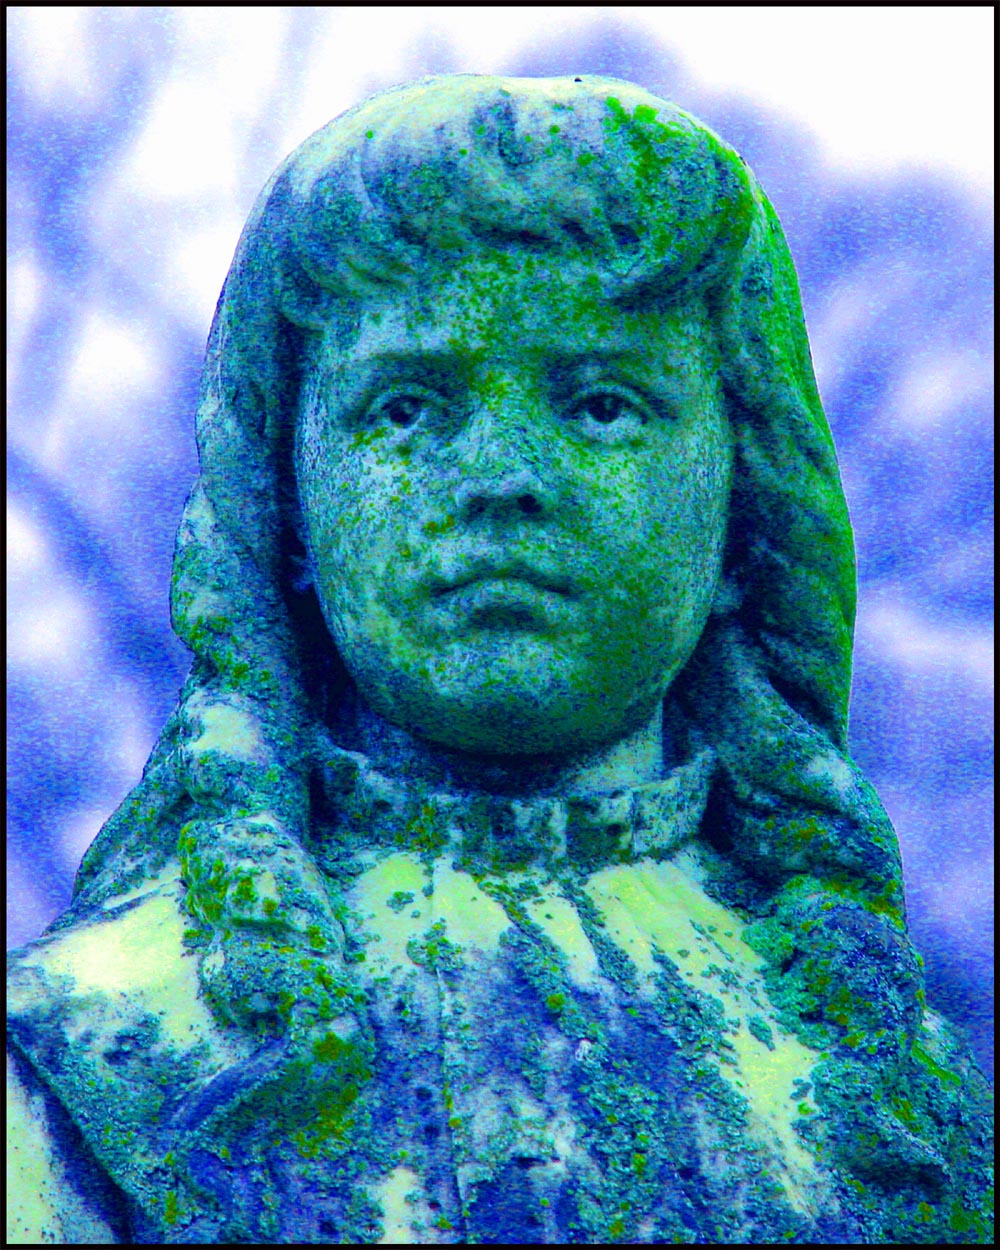 Very lonely looking little girl who will never be alone. Little Martha in Rose Hill Cemetary.
